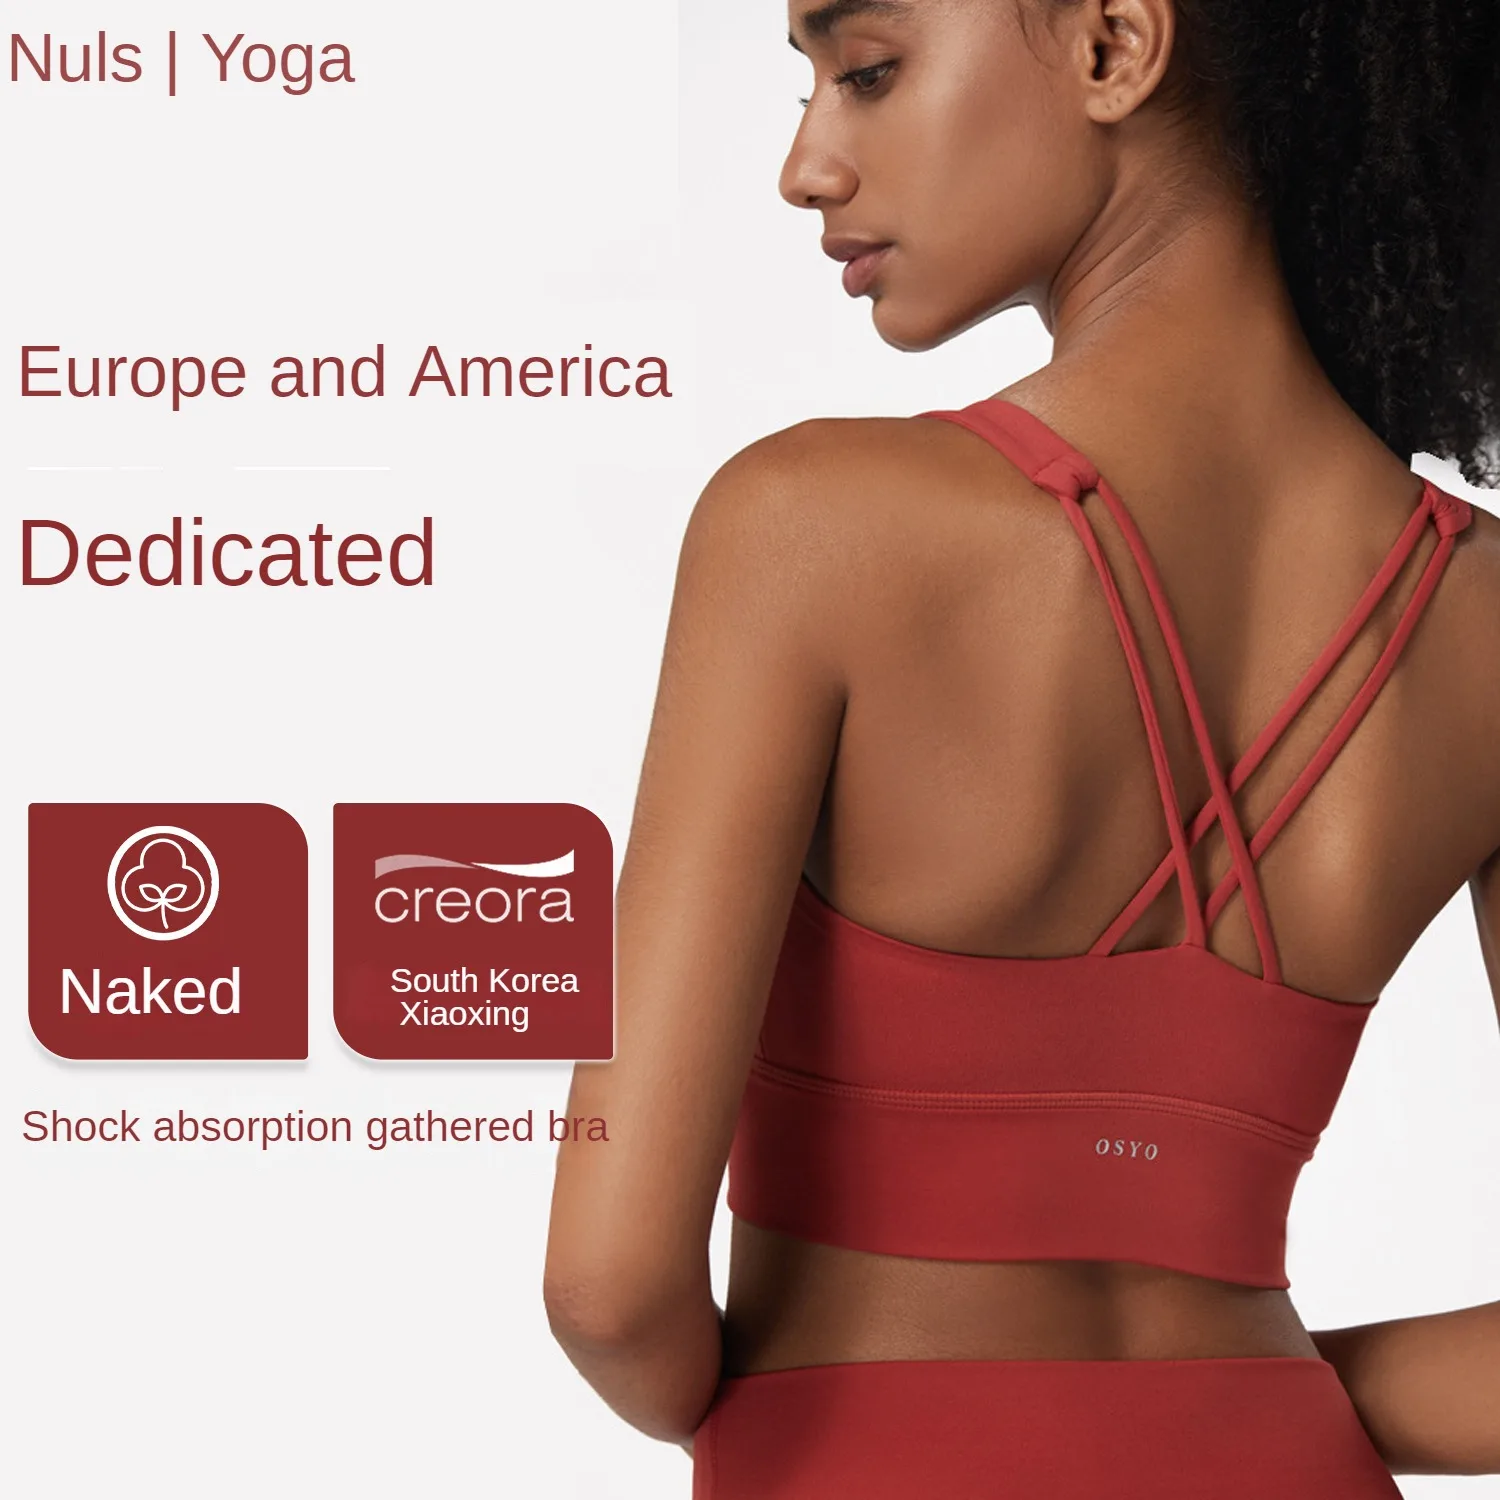 

Sports Bra NULS Nude Comfortable One-piece Europe and The United States Cross-back Sling Shock Absorption Gathered Fitness Vest